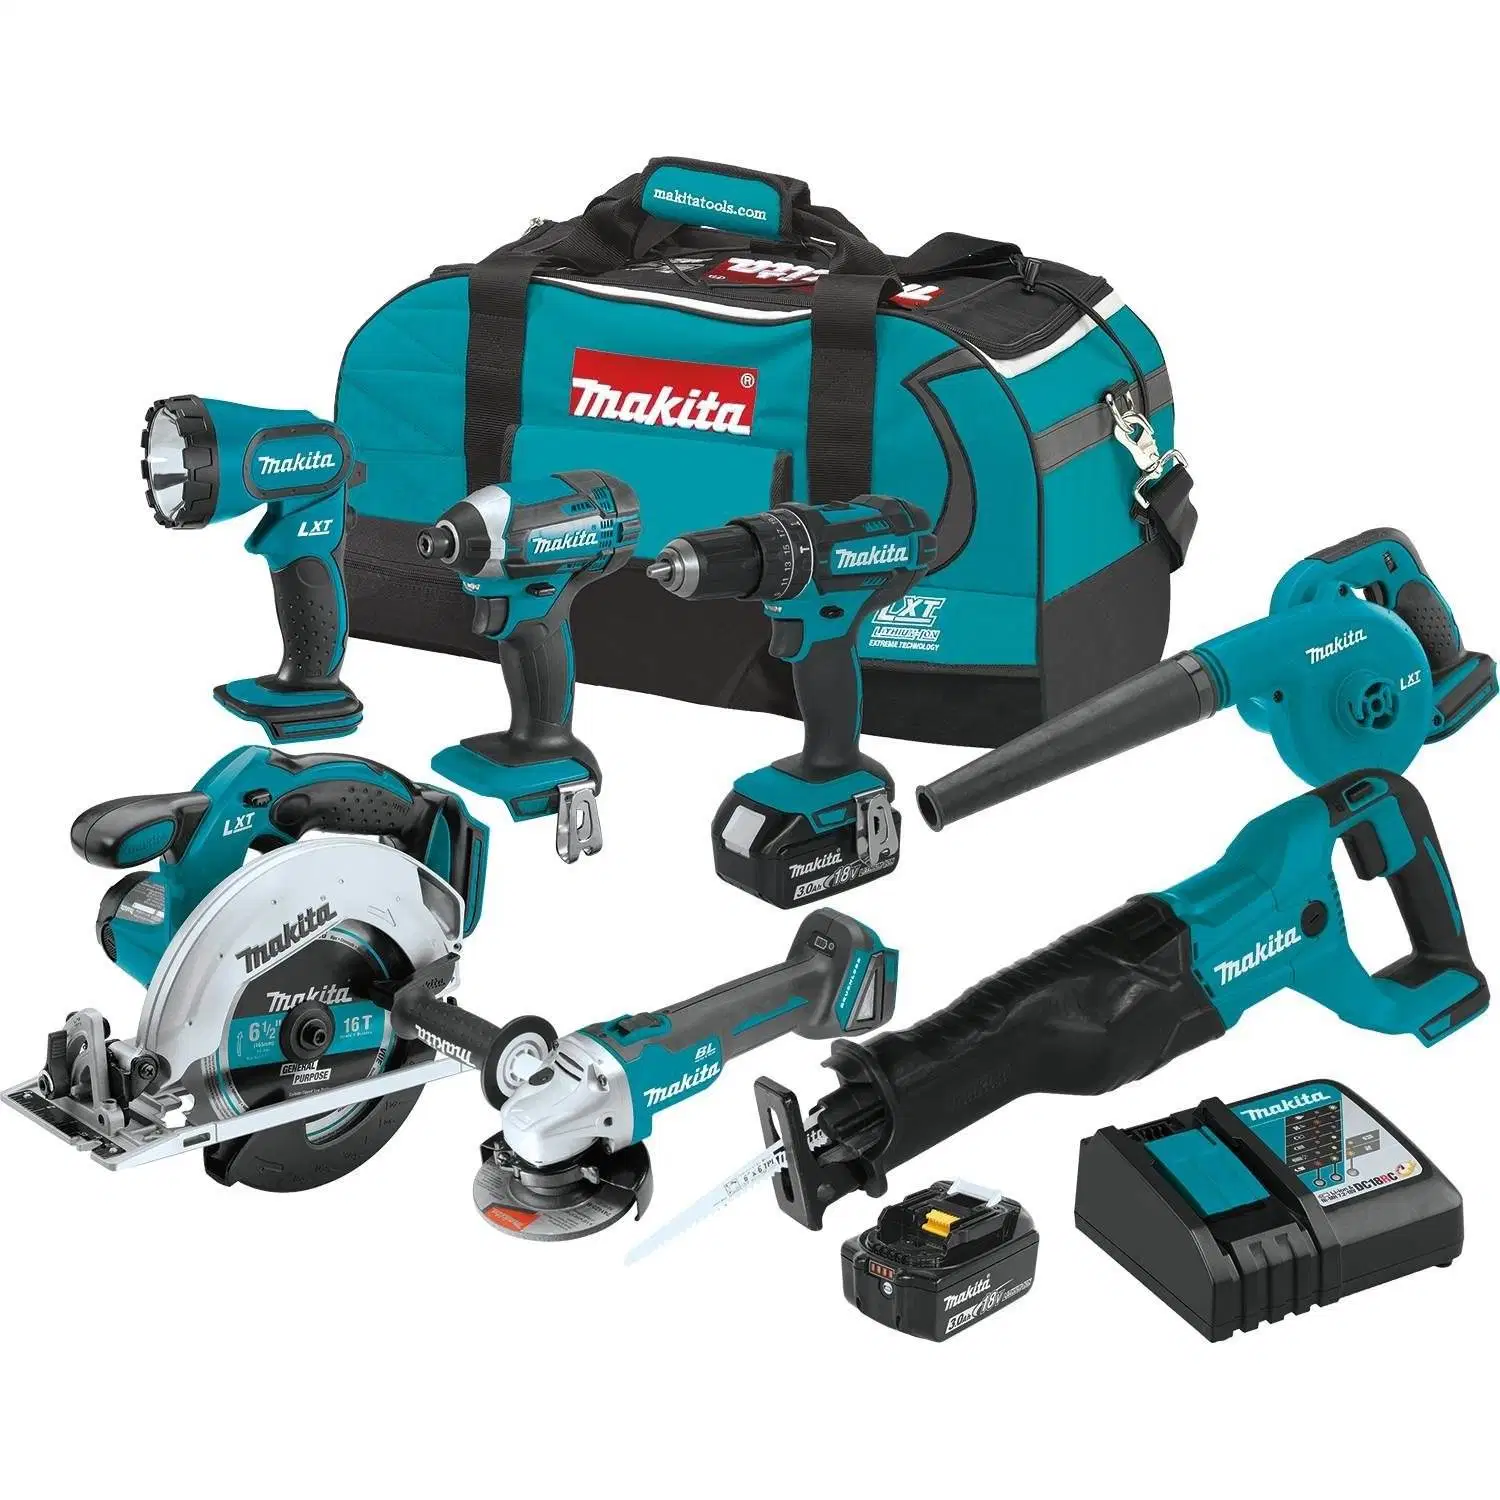 Makita Set 18V Brushless Electric with Batteries & Charger Makita Tools